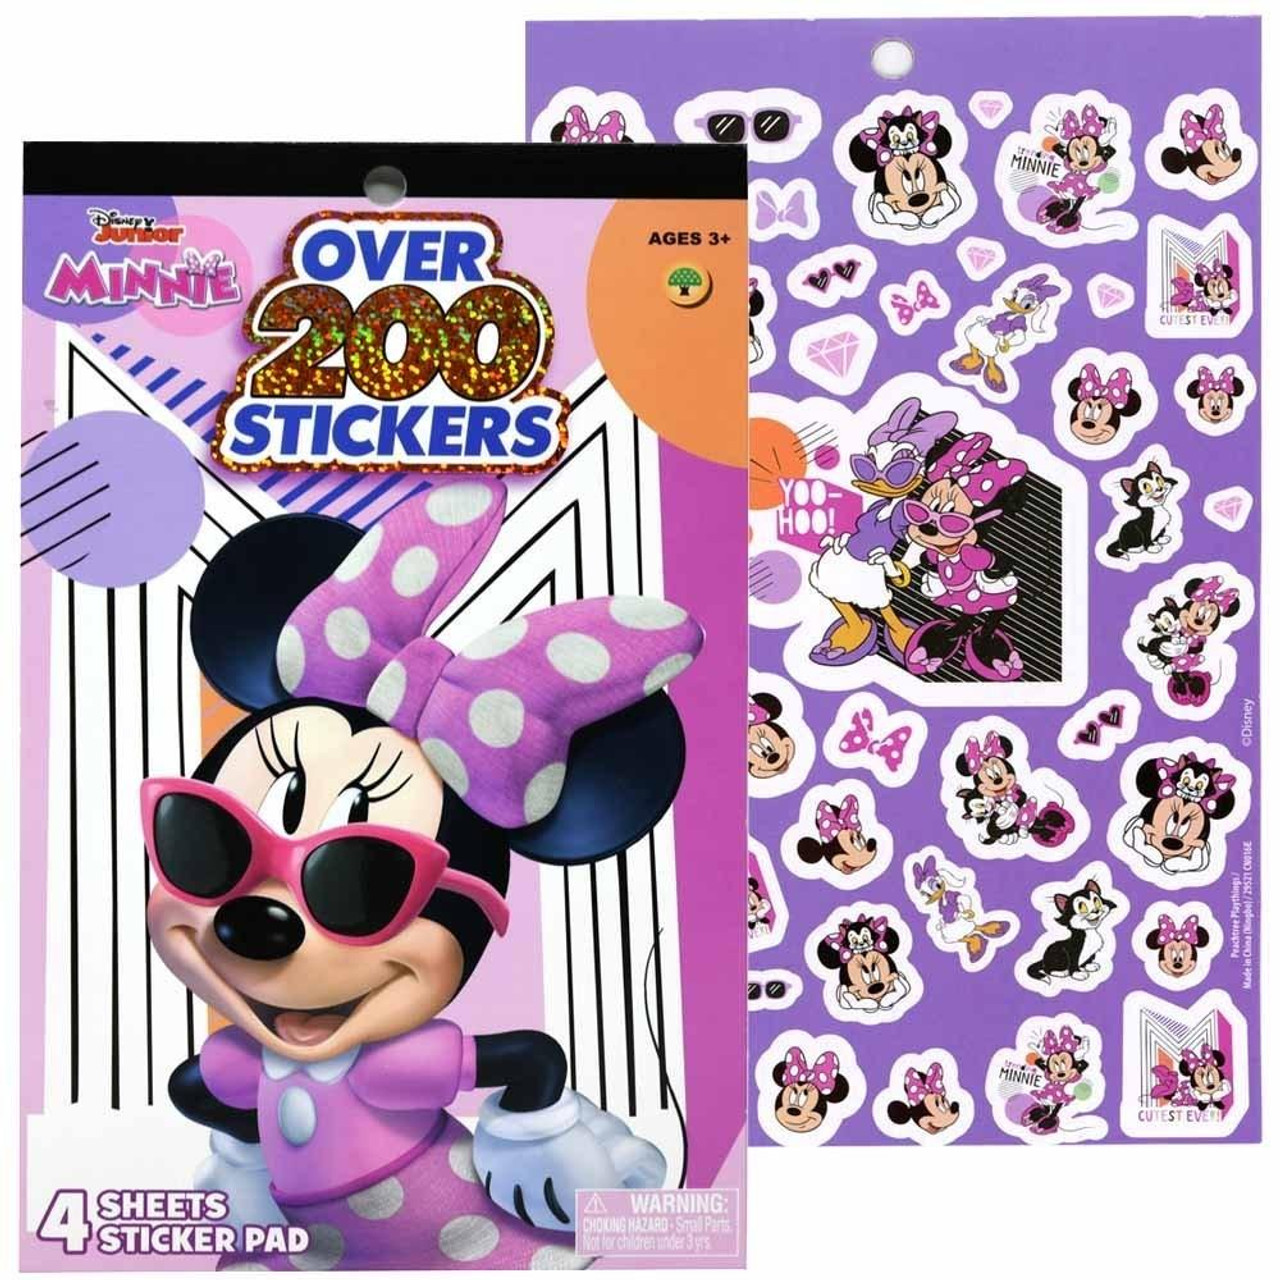 Disney Minnie Mouse Sticker Book with Over 200 Stickers - Think Kids